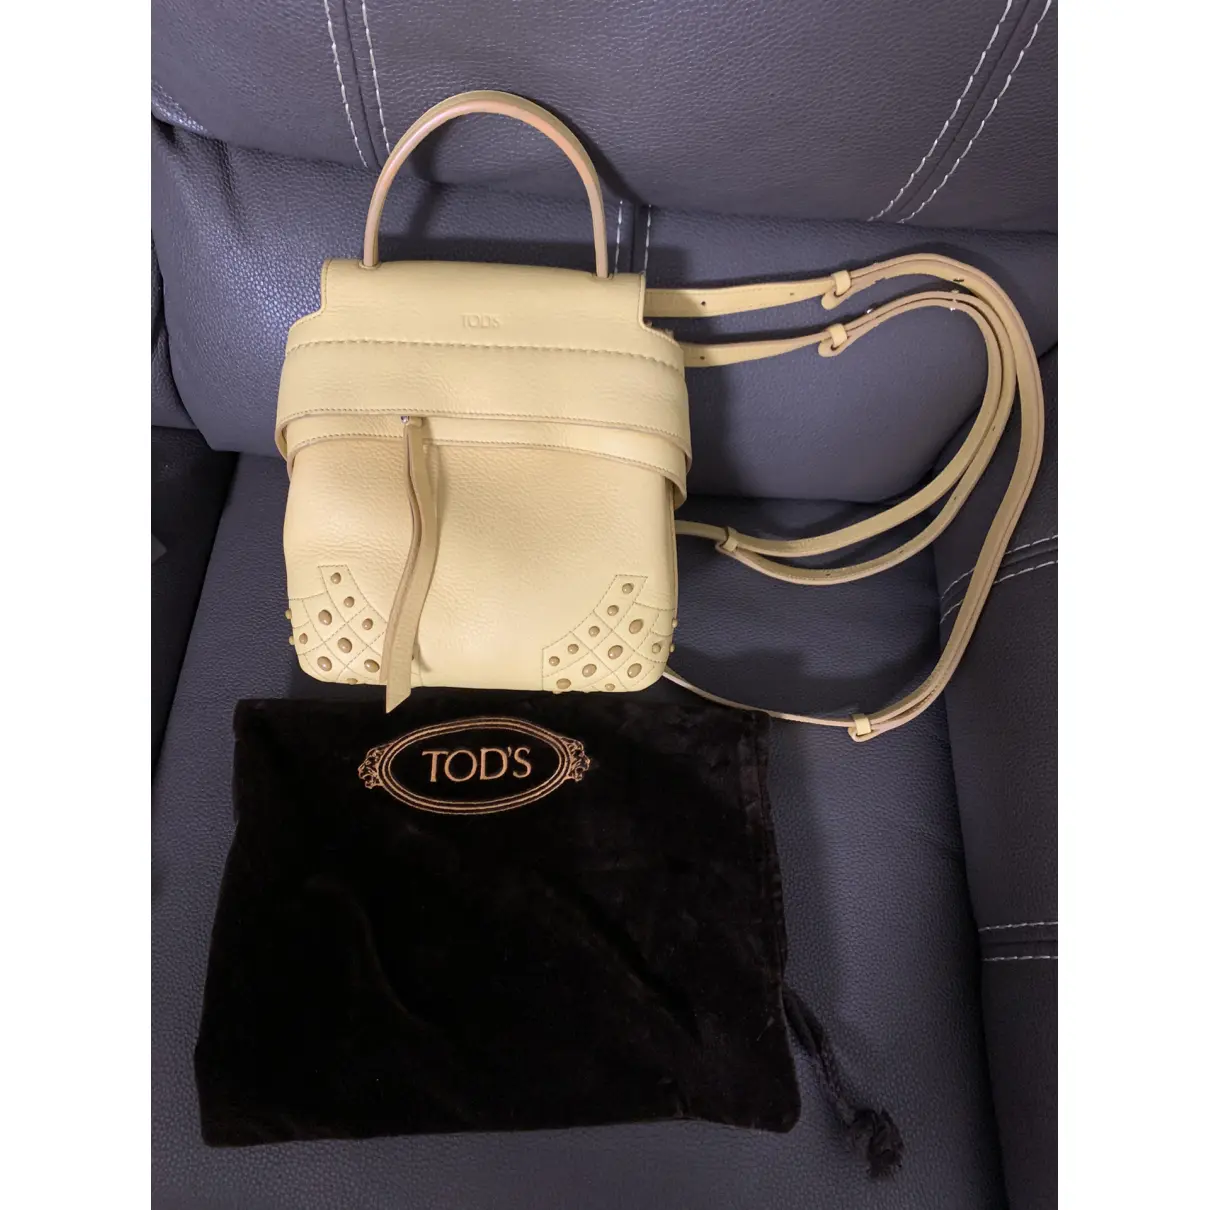 Buy Tod's Leather backpack online